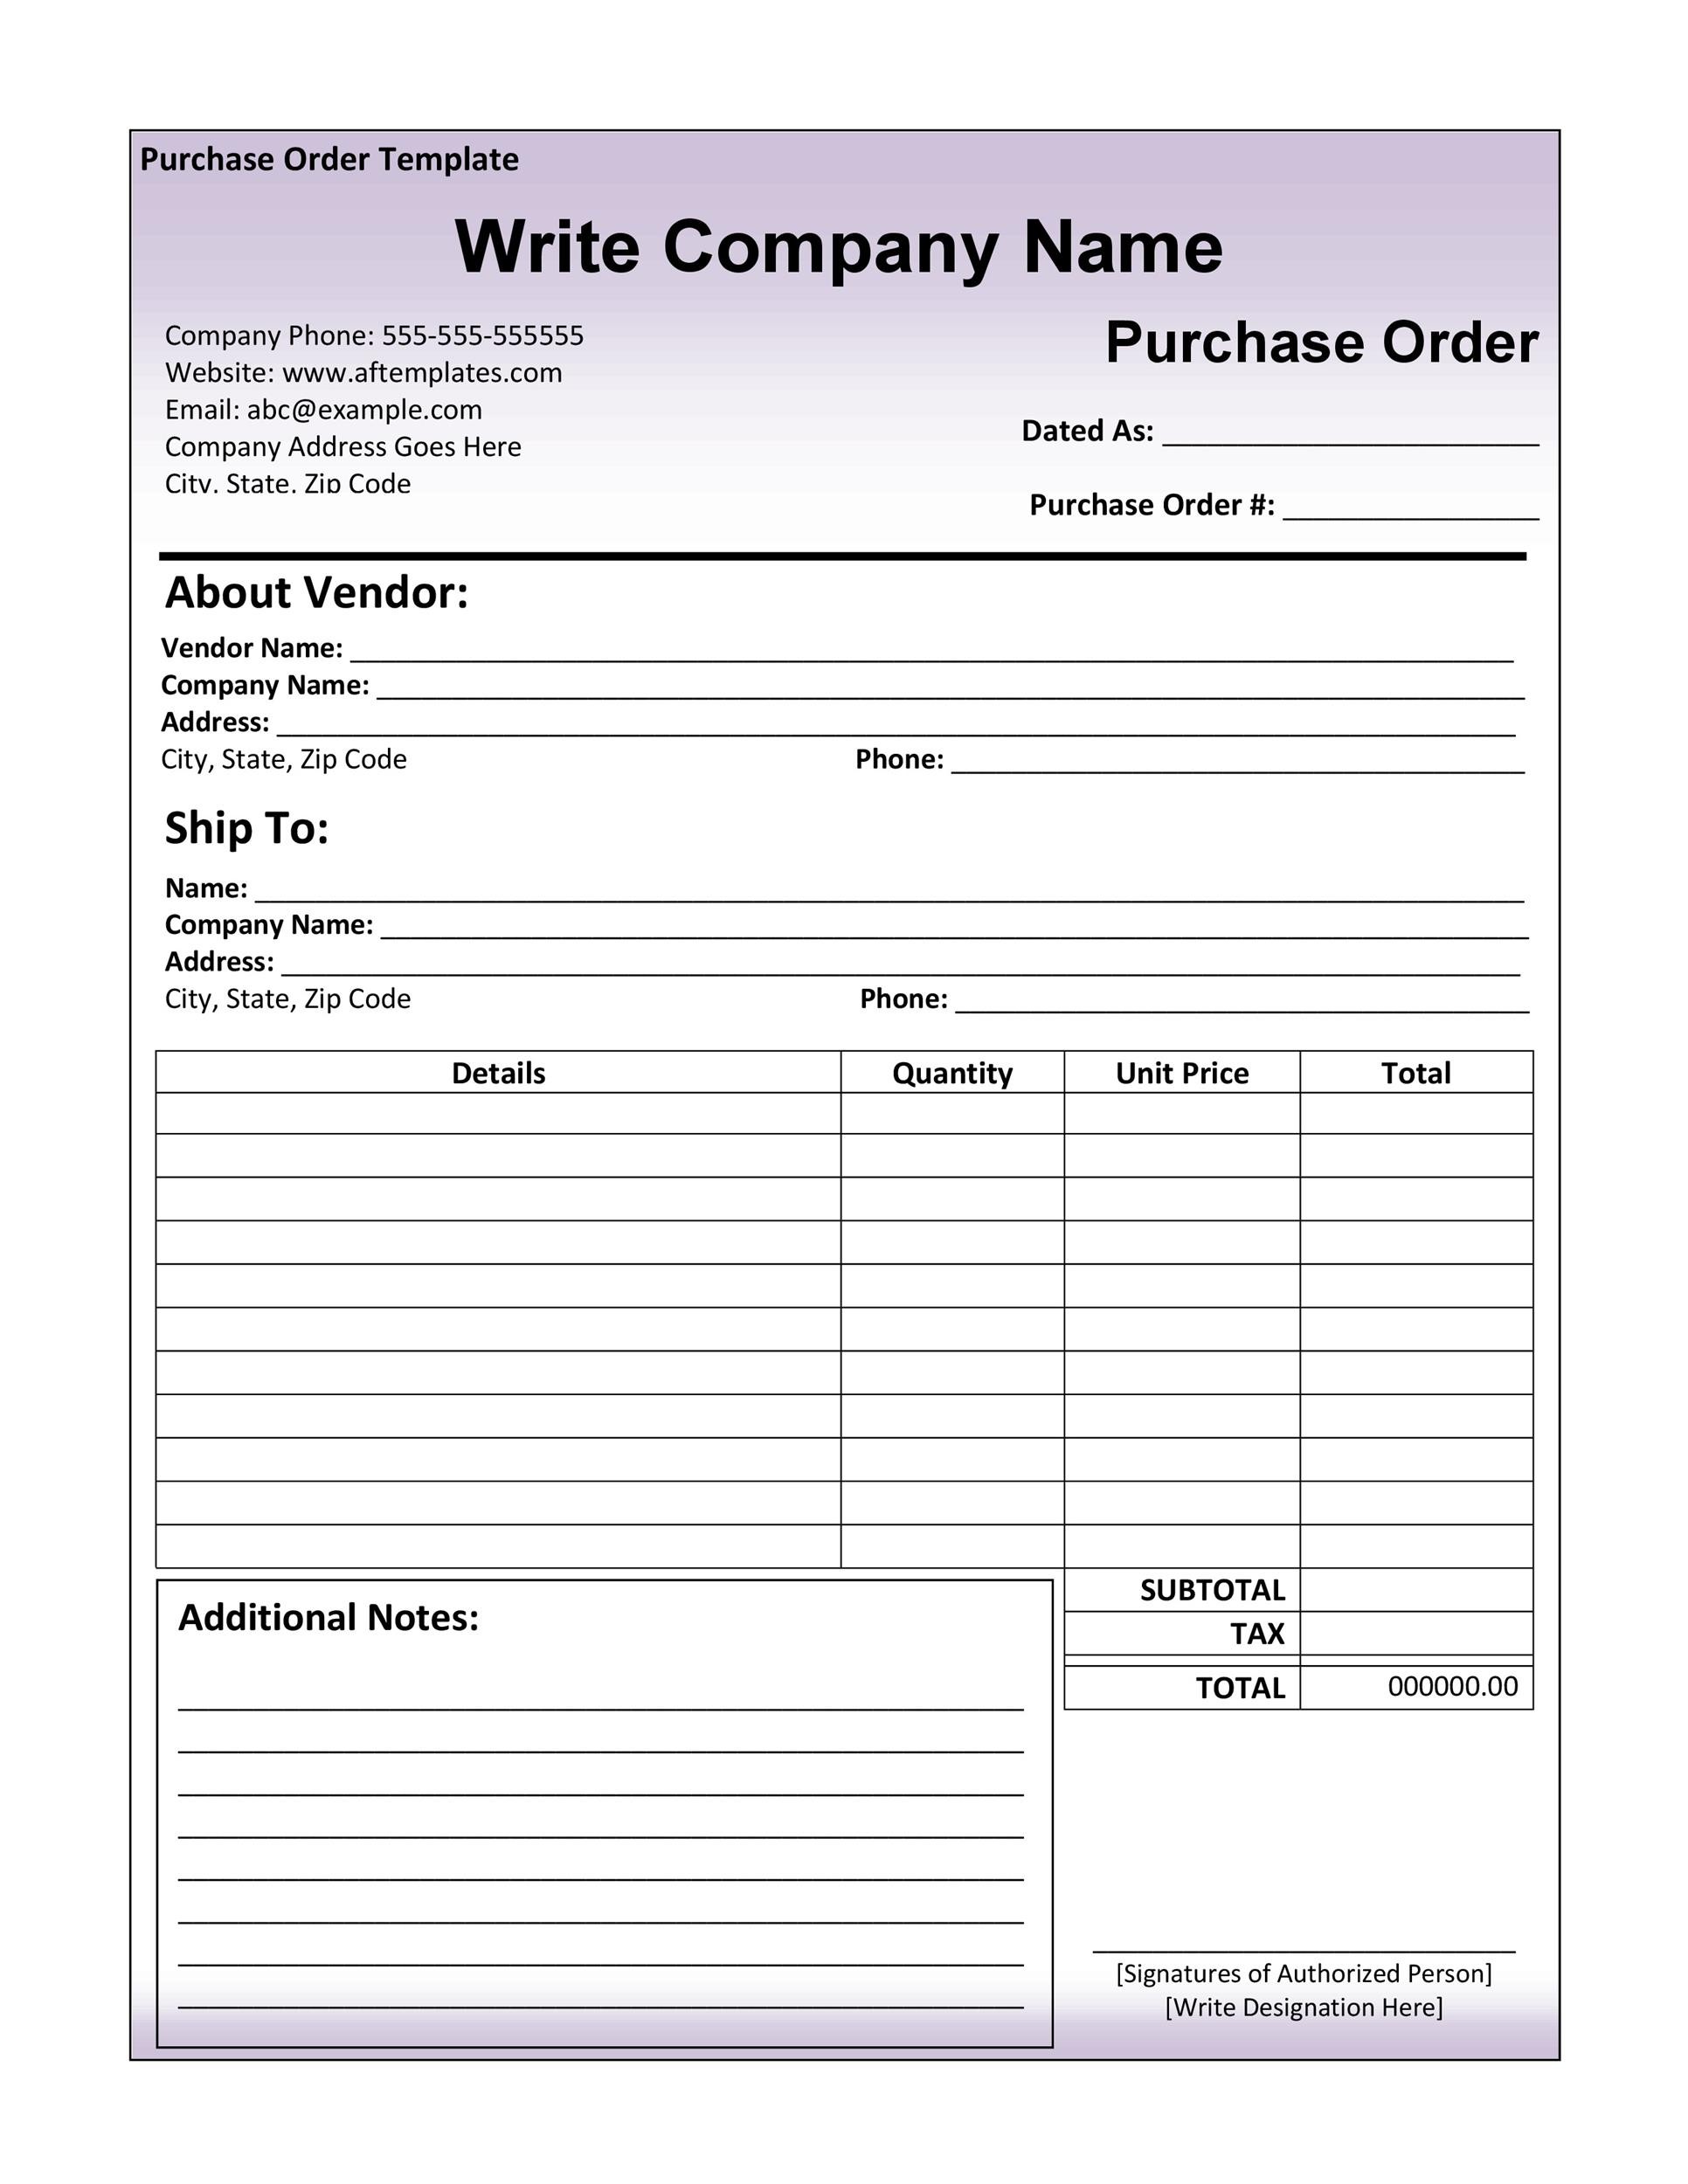 free-purchase-requisition-template-excel